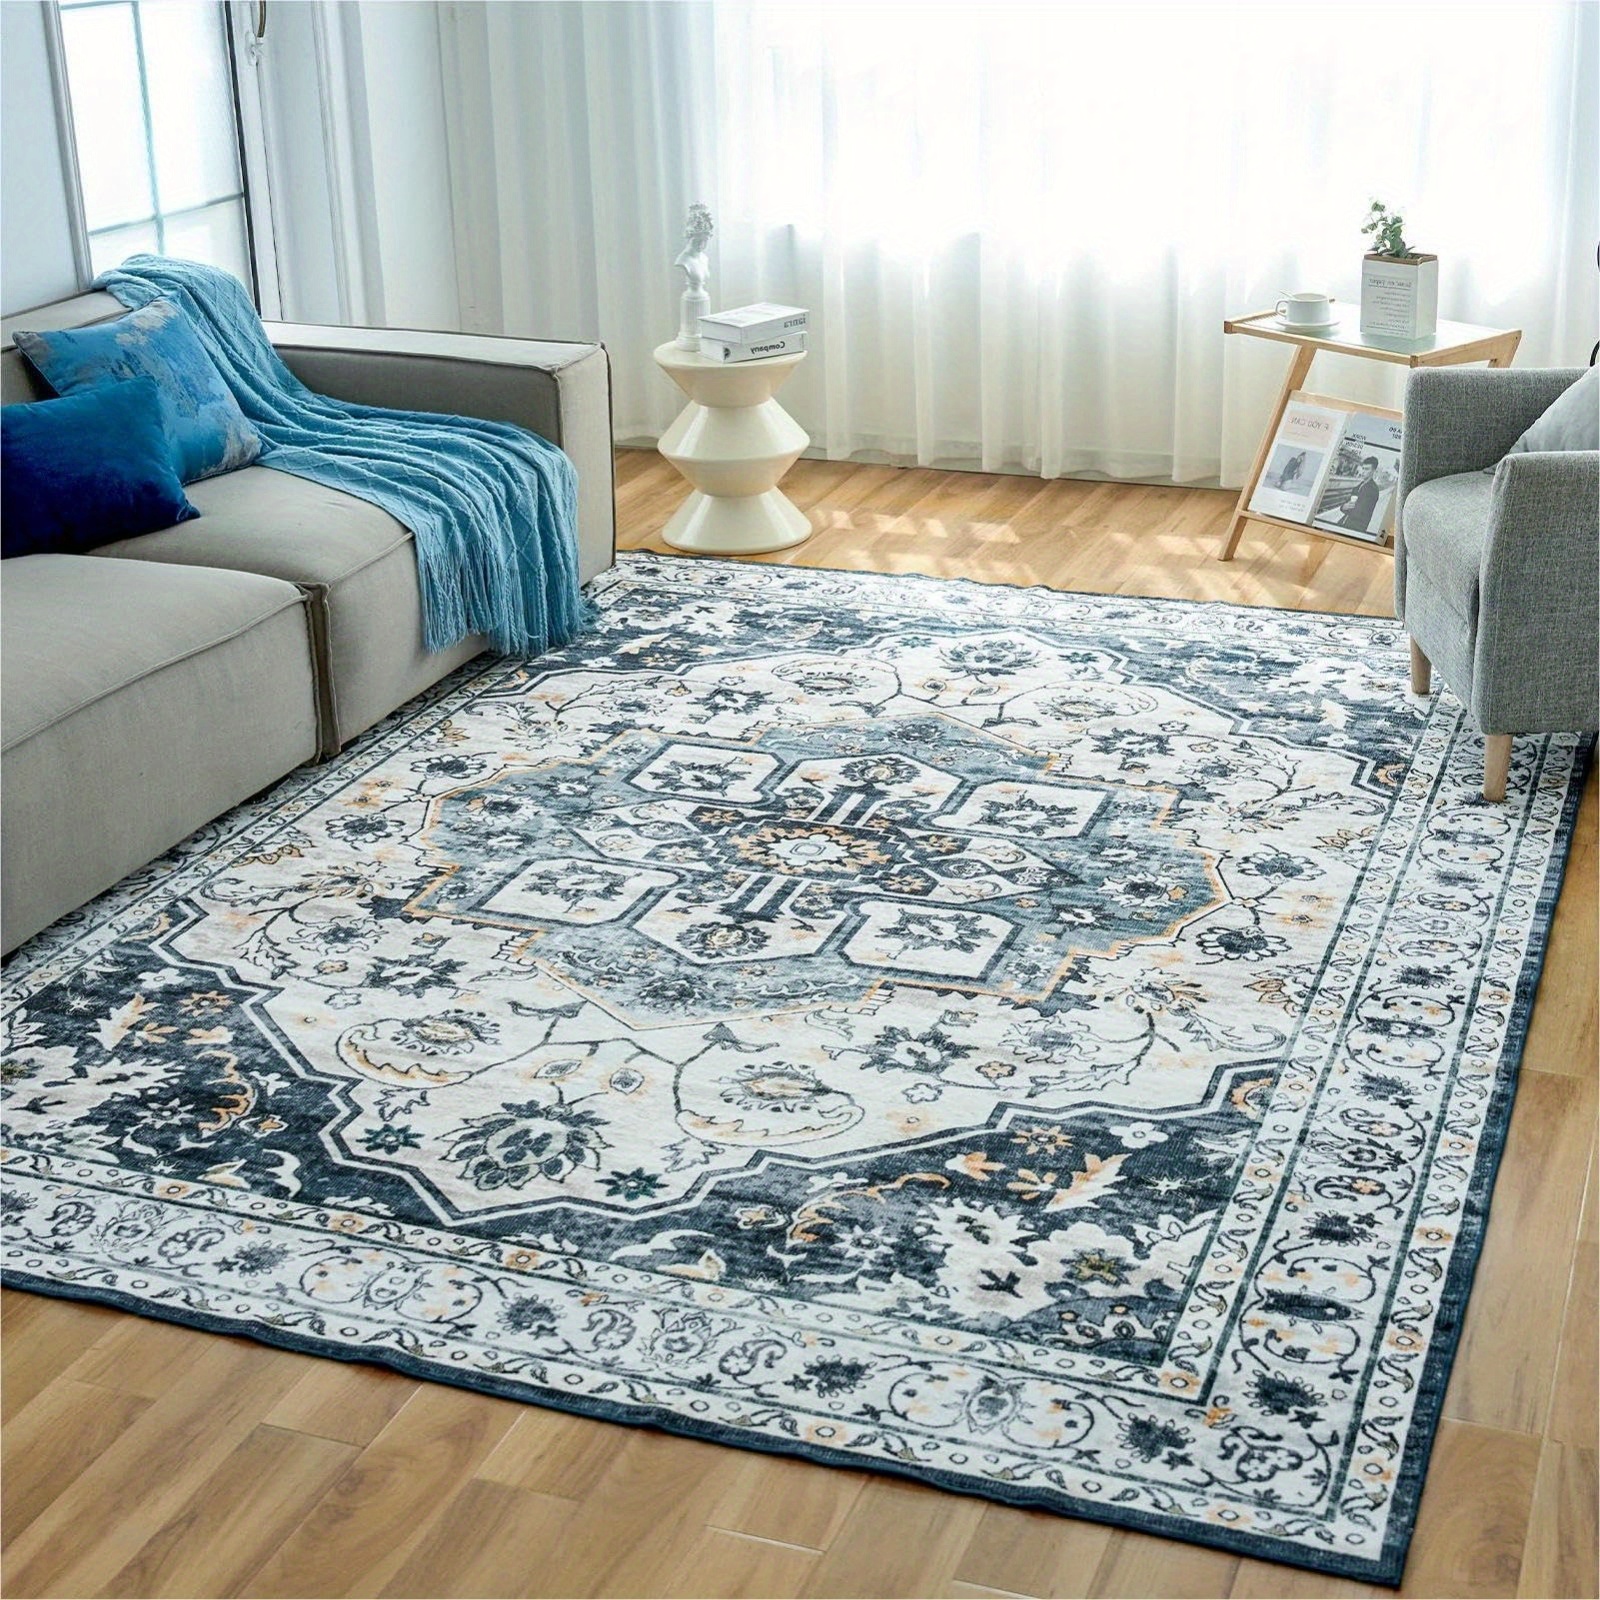 

Washable Rug Vintage Medallion Area Rug With Non-slip Backing, Non-shedding Floor Mat For Living Room Bedroom Kitchen Laundry Home Office, Blue